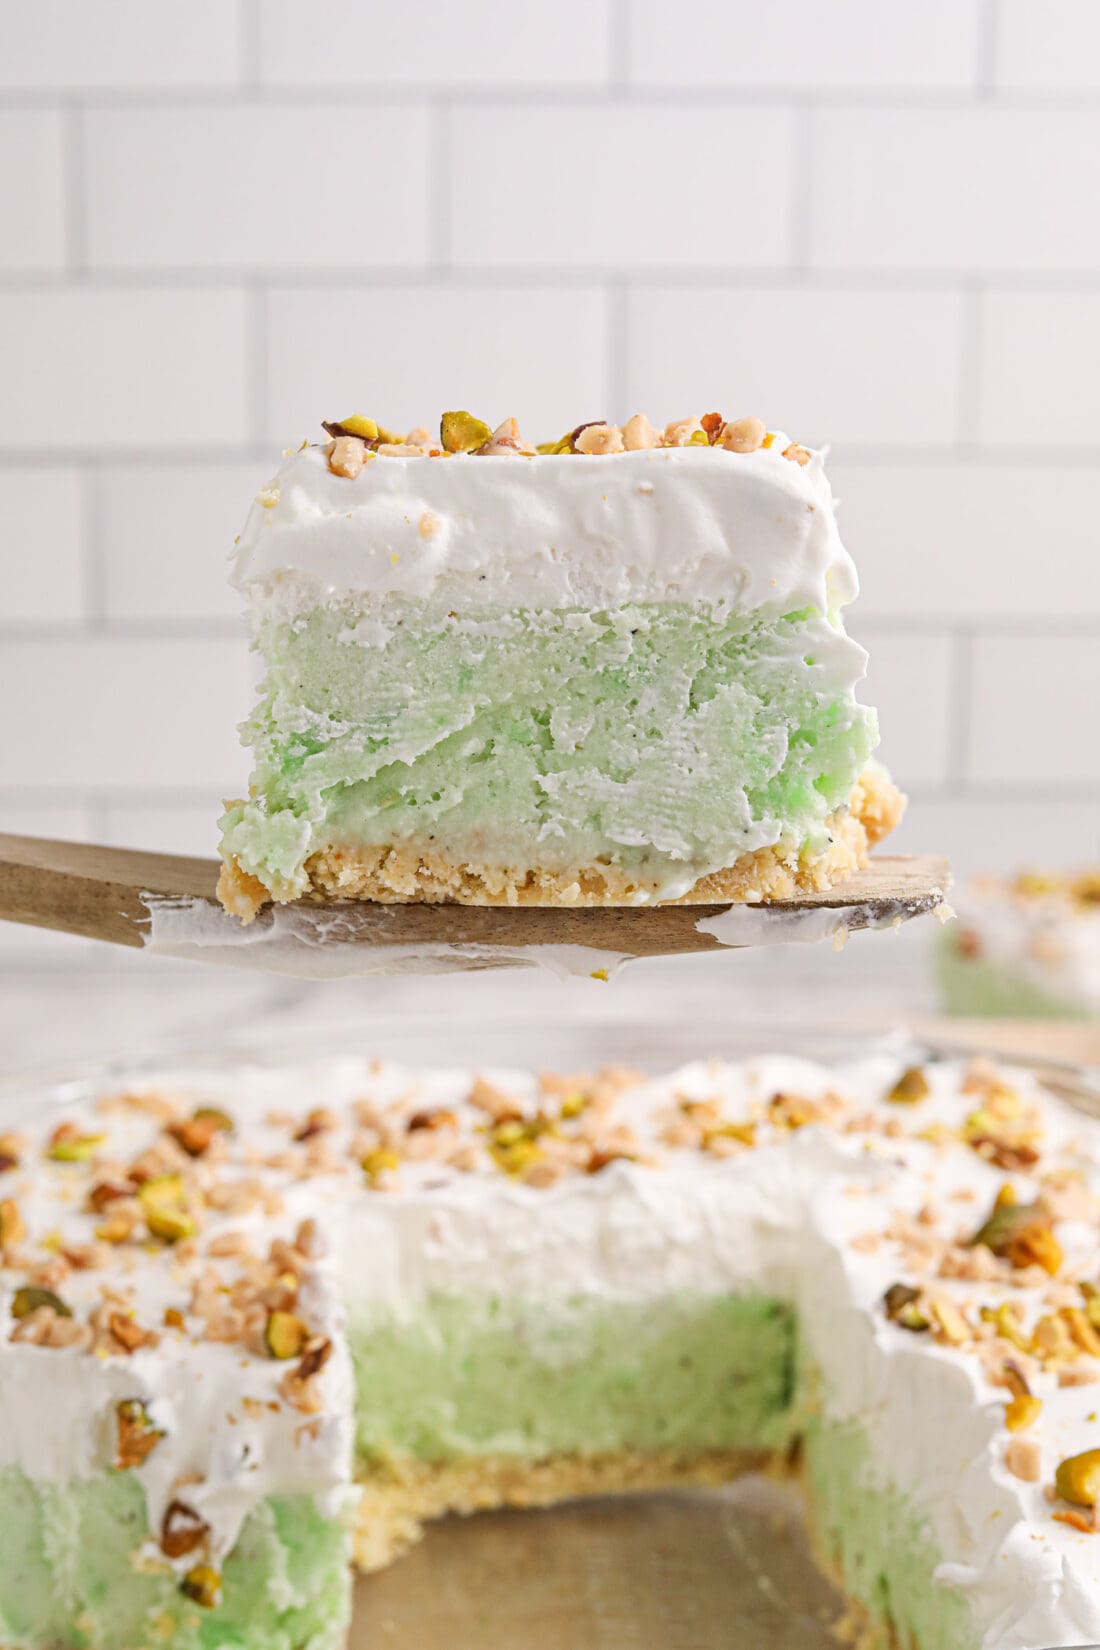 Slice of Pistachio Ice Cream Cake on a spatula being lifted above the pan